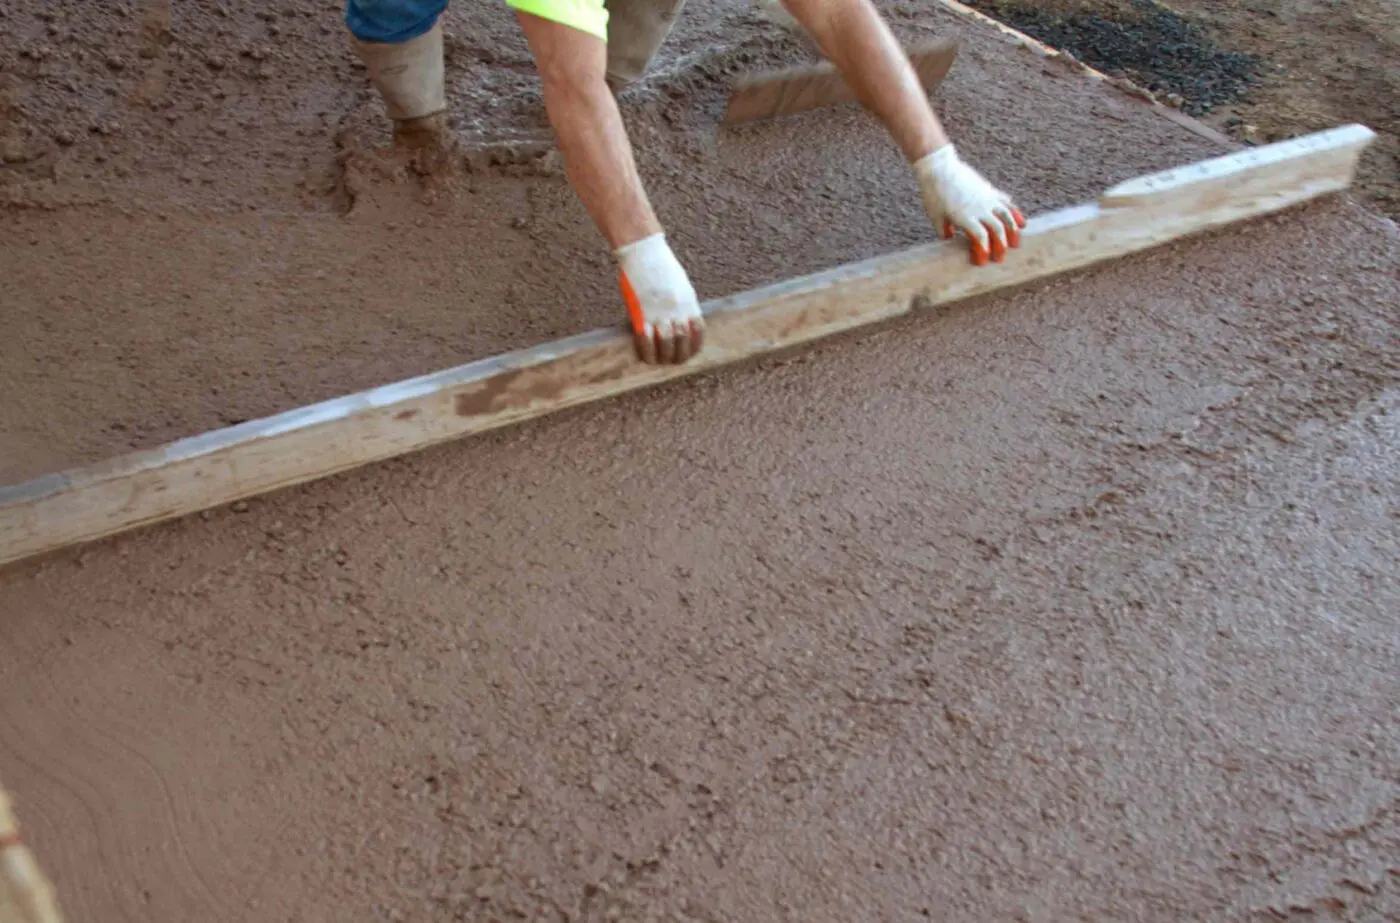 A person in white gloves spreading concrete with a straightedge tool on a construction site, representing Reno Concrete Solutions. The individual, wearing a yellow shirt and partly visible boots, ensures the surface remains smooth after being worked on for quality concrete solutions.